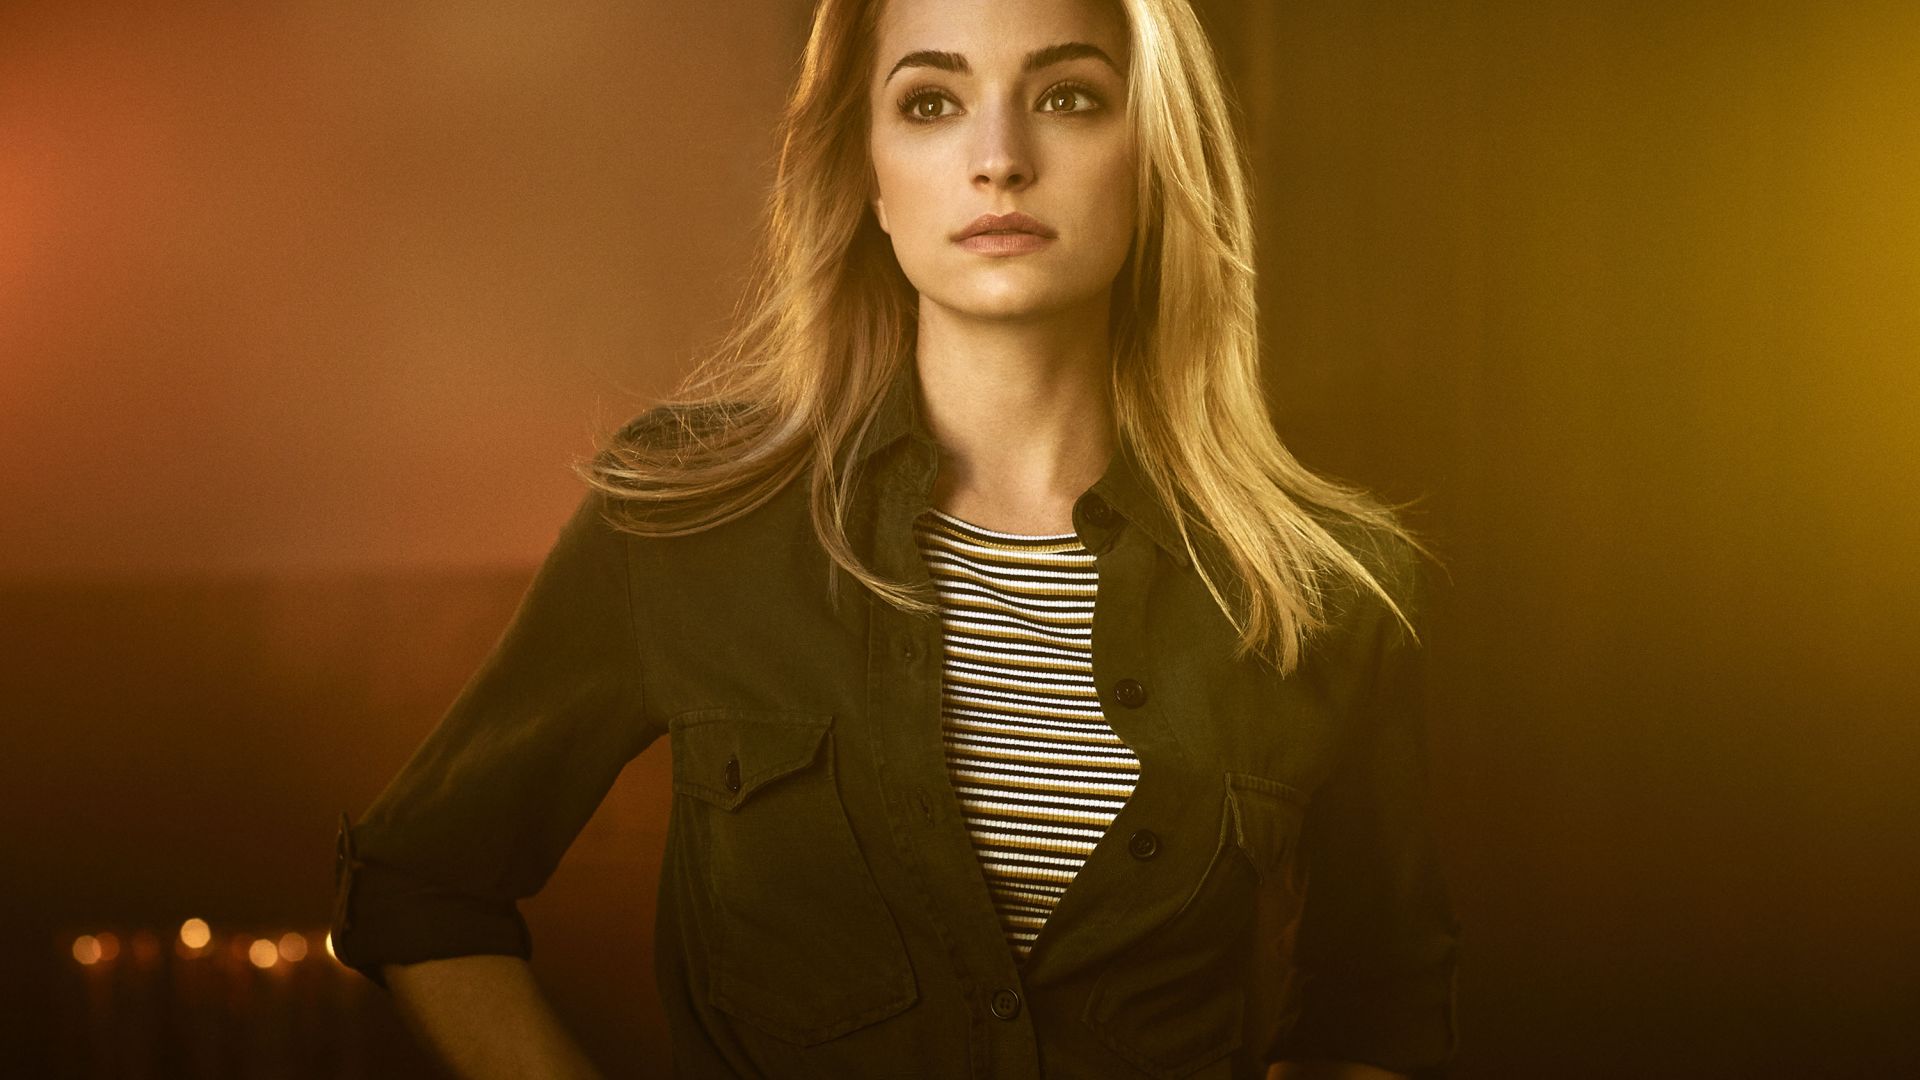 Wallpaper Brianne Howey from The exorcist tv series